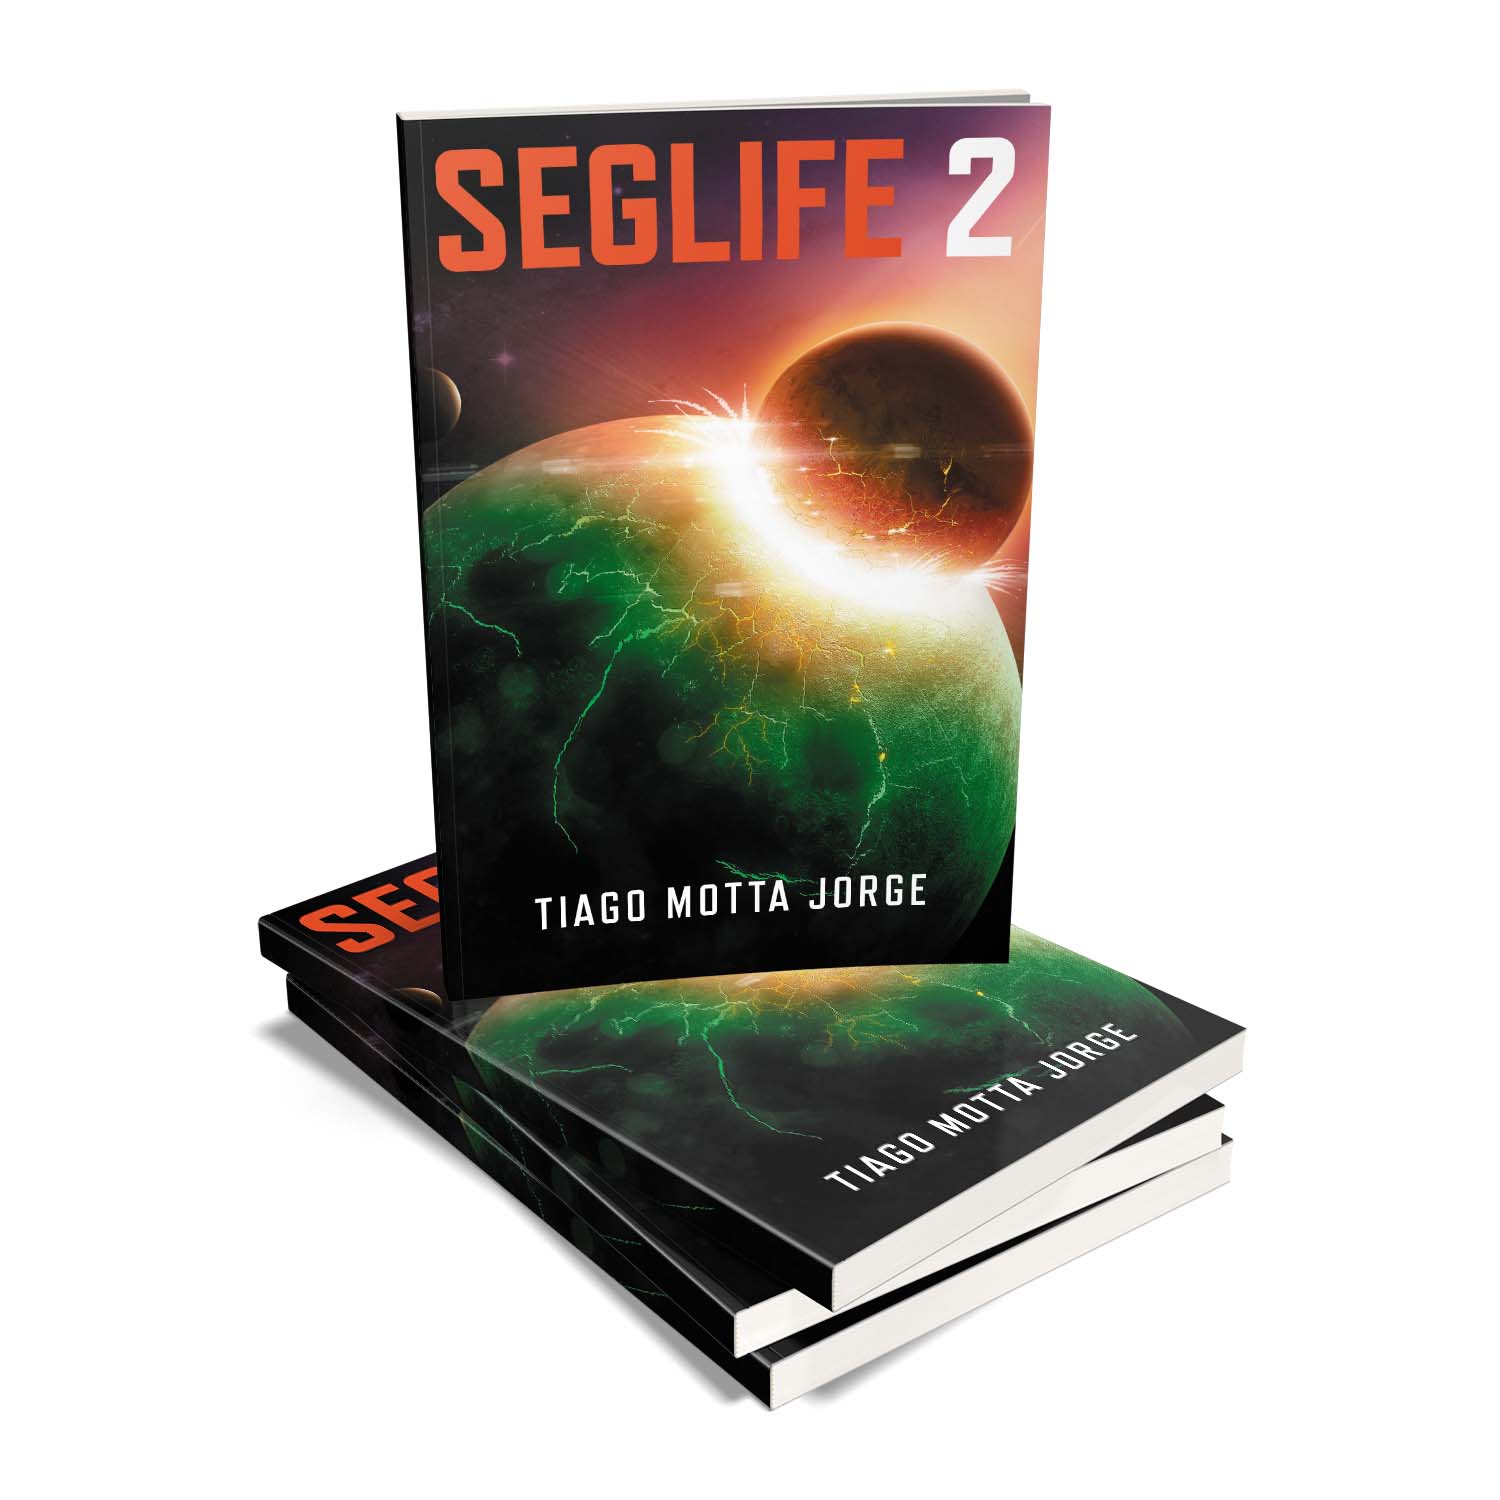 The Seglife Trilogy is reality-bending scifi series by Tiago Motta Jorge. The book covers were designed by Mark Thomas of coverness.com. To find out more about my book design services, please visit www.coverness.com